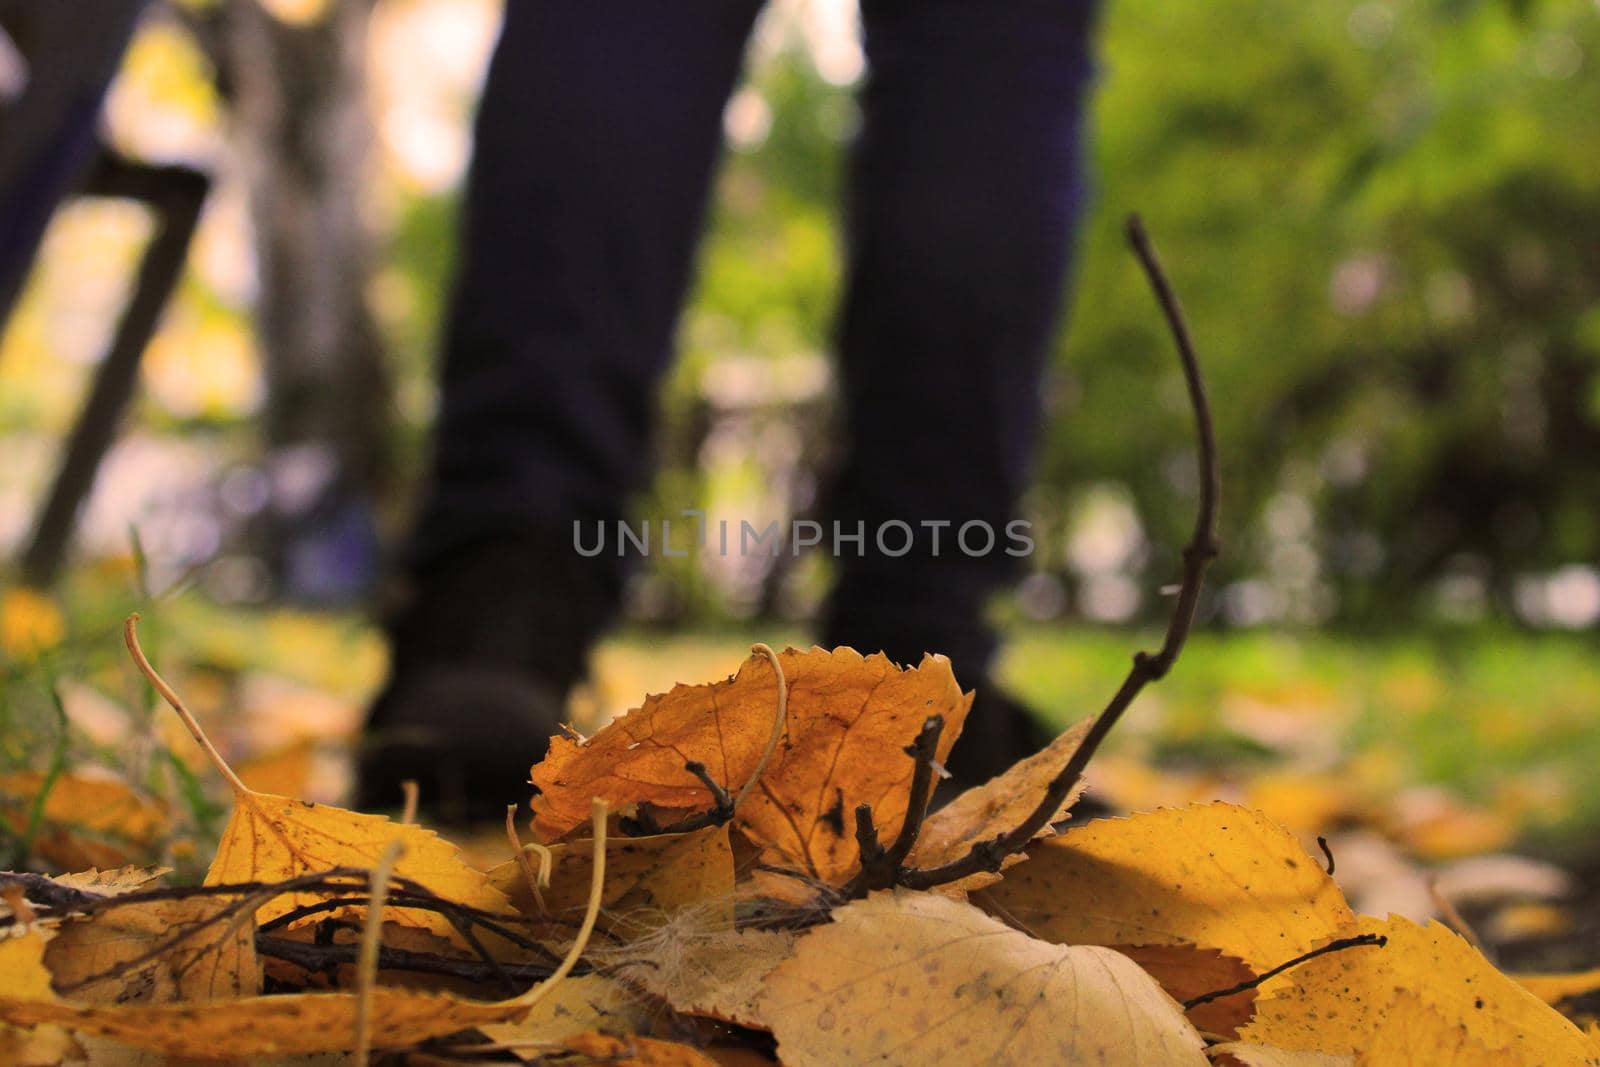 Women's legs in blue jeans and black sneakers against the background of autumn yellow-orange leaves. Blurred background by IronG96